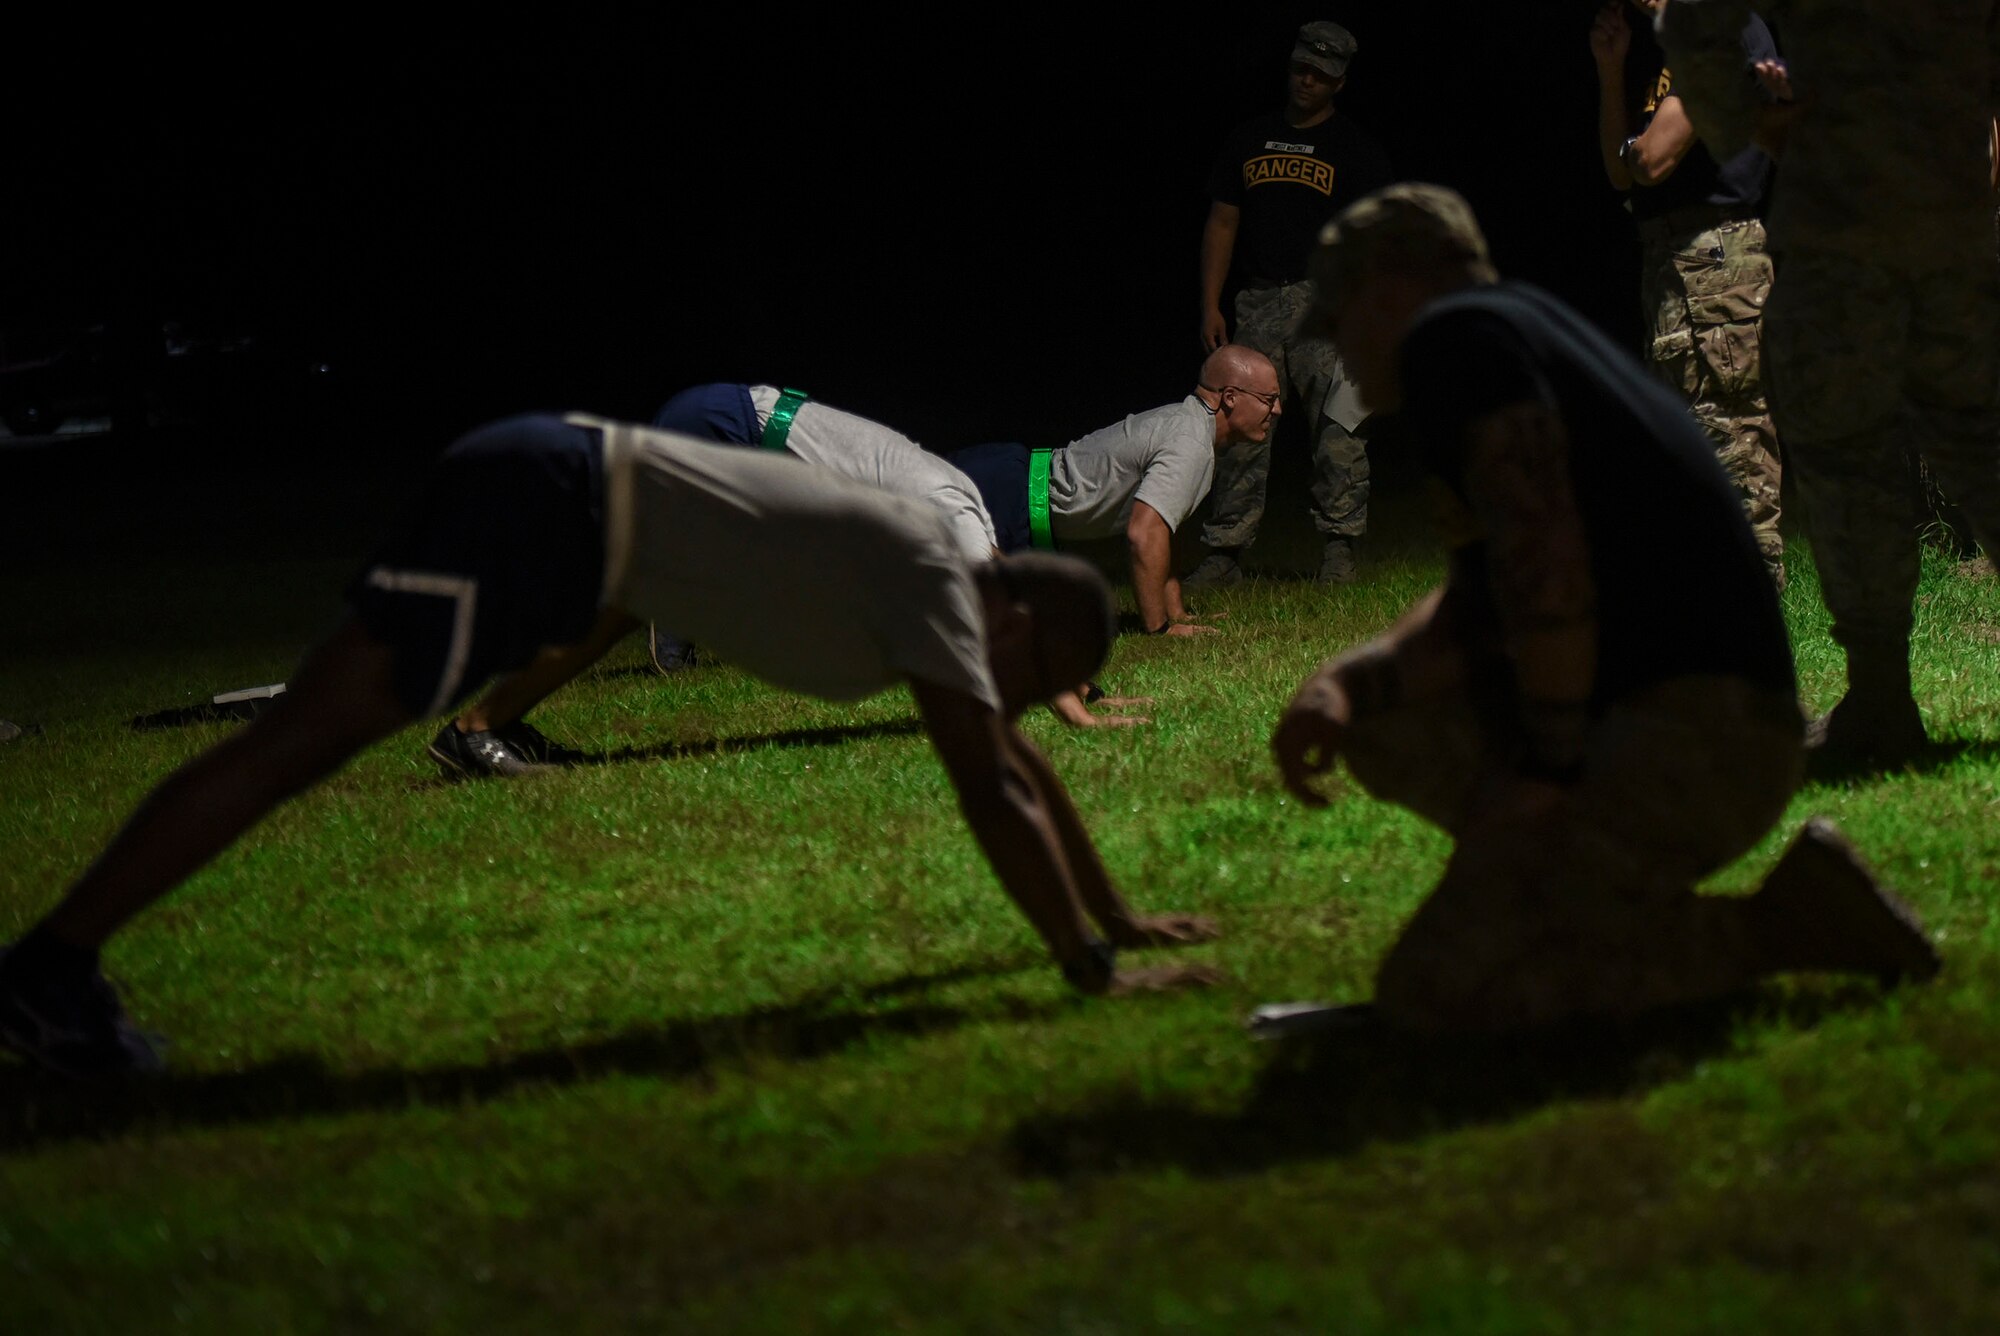 Pre-Ranger Assessment Course (Pre-RAC) instructors evaluate Airmen performing push ups during a Pre-RAC, Aug. 24, 2018, at Moody Air Force Base, Ga. Moody’s 93d Air Ground Operations Wing hosted the three-day assessment which challenged approximately 20 Airmen from the 93d AGOW and 23d Wing on their physical fitness, land navigation skills, leadership qualities, water confidence and academic and tactical abilities under duress. The evaluation is designed to determine whether Airmen are ready to attend the Air Force Ranger Assessment Course held at Fort Bliss, Texas. (U.S. Air Force photo by Senior Airman Greg Nash)